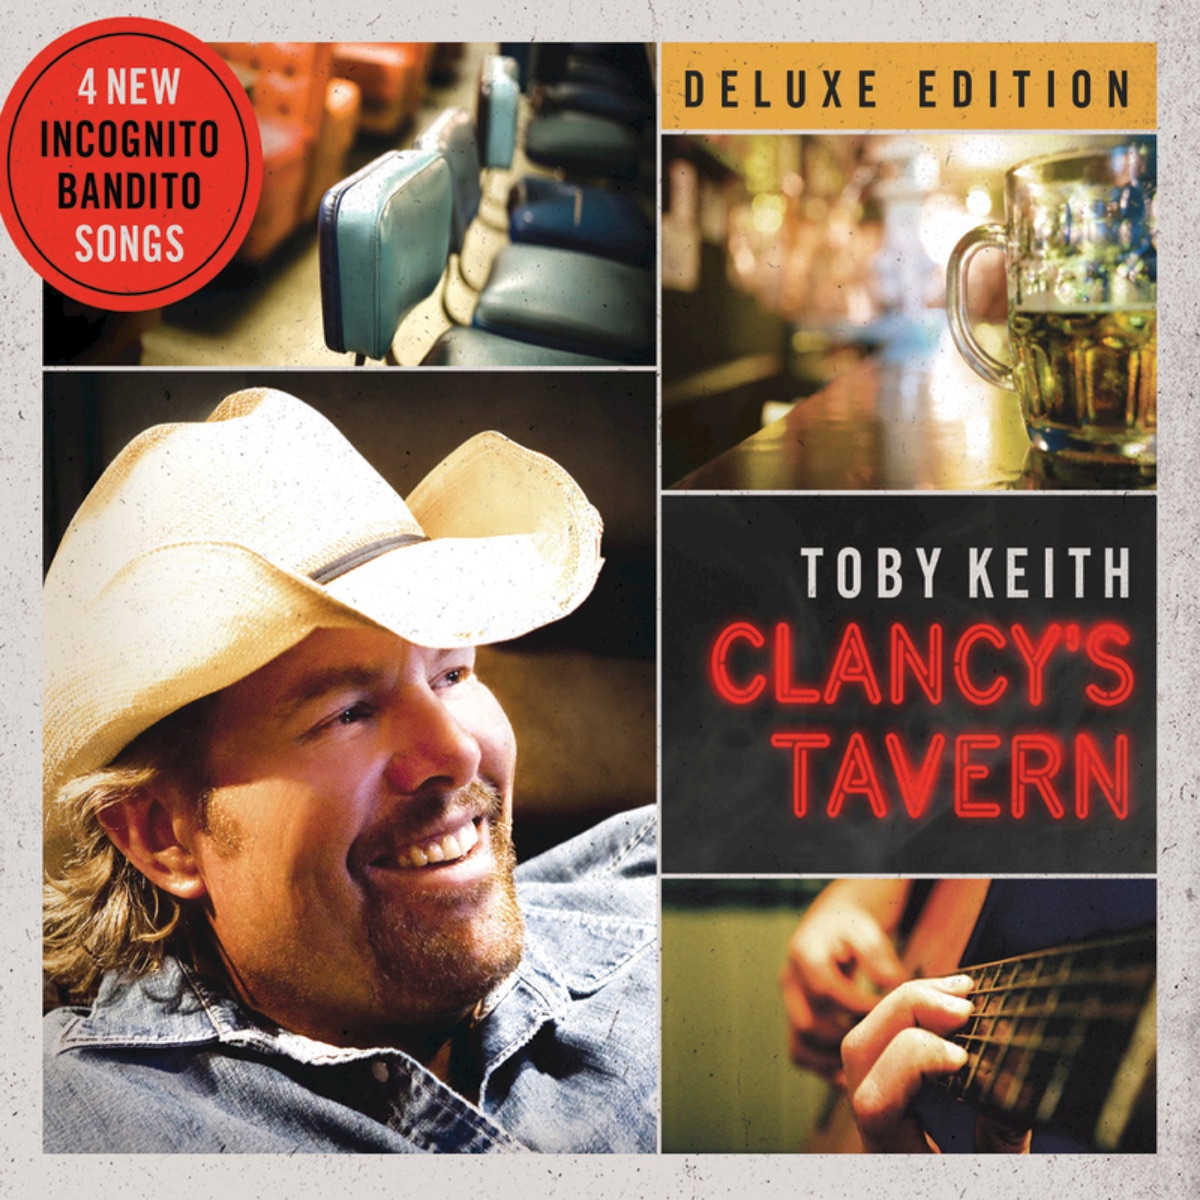 Toby Keith 35 Biggest Hits - Album by Toby Keith